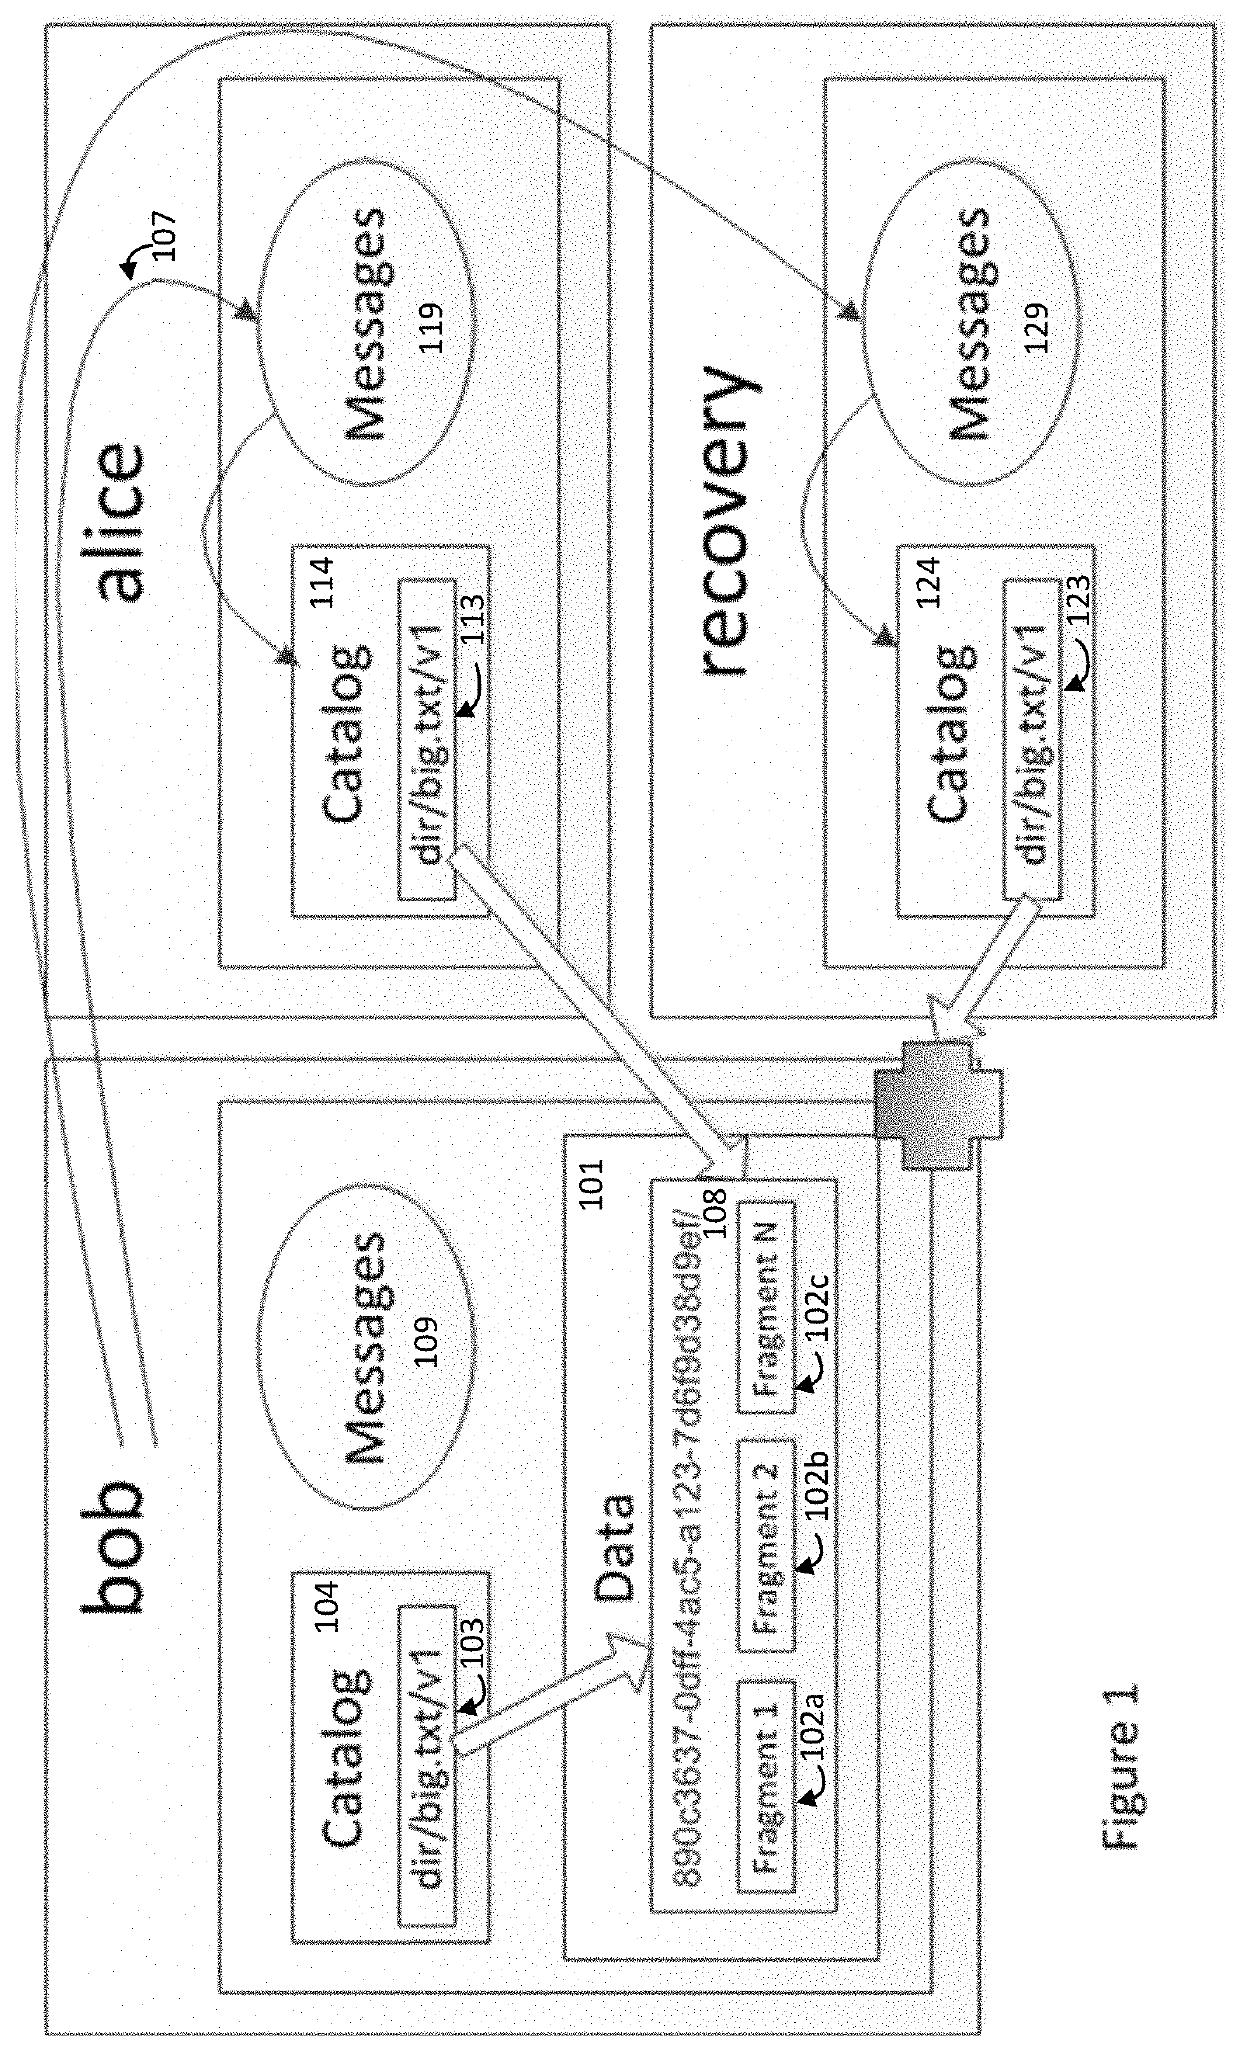 Method and system for secure data storage exchange, processing, and access